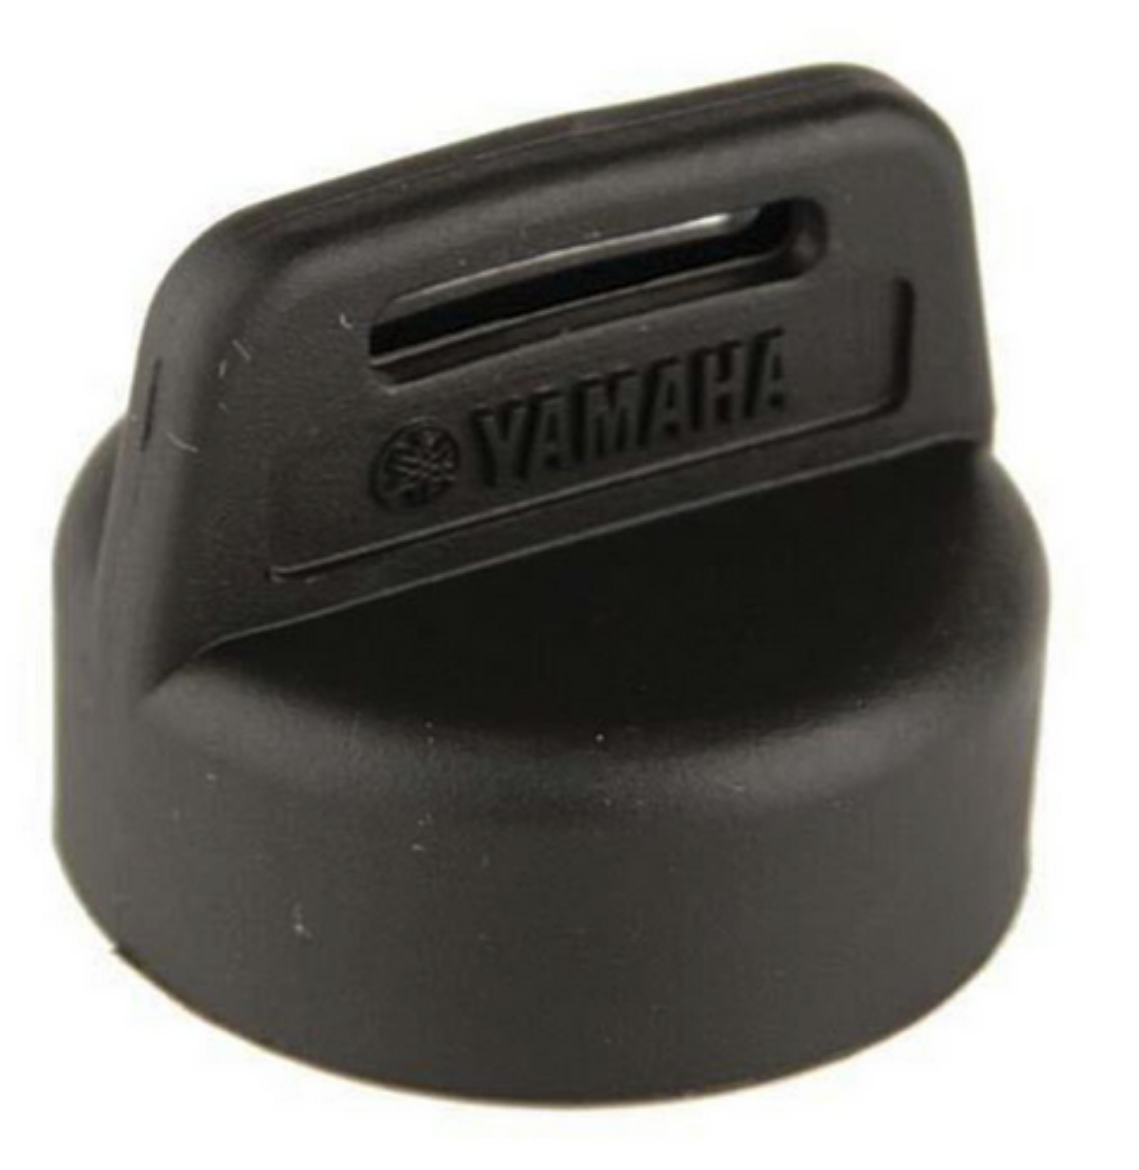 Picture of YAMAHA IGNITION KEY CAP FOR MODELS G14 - G29